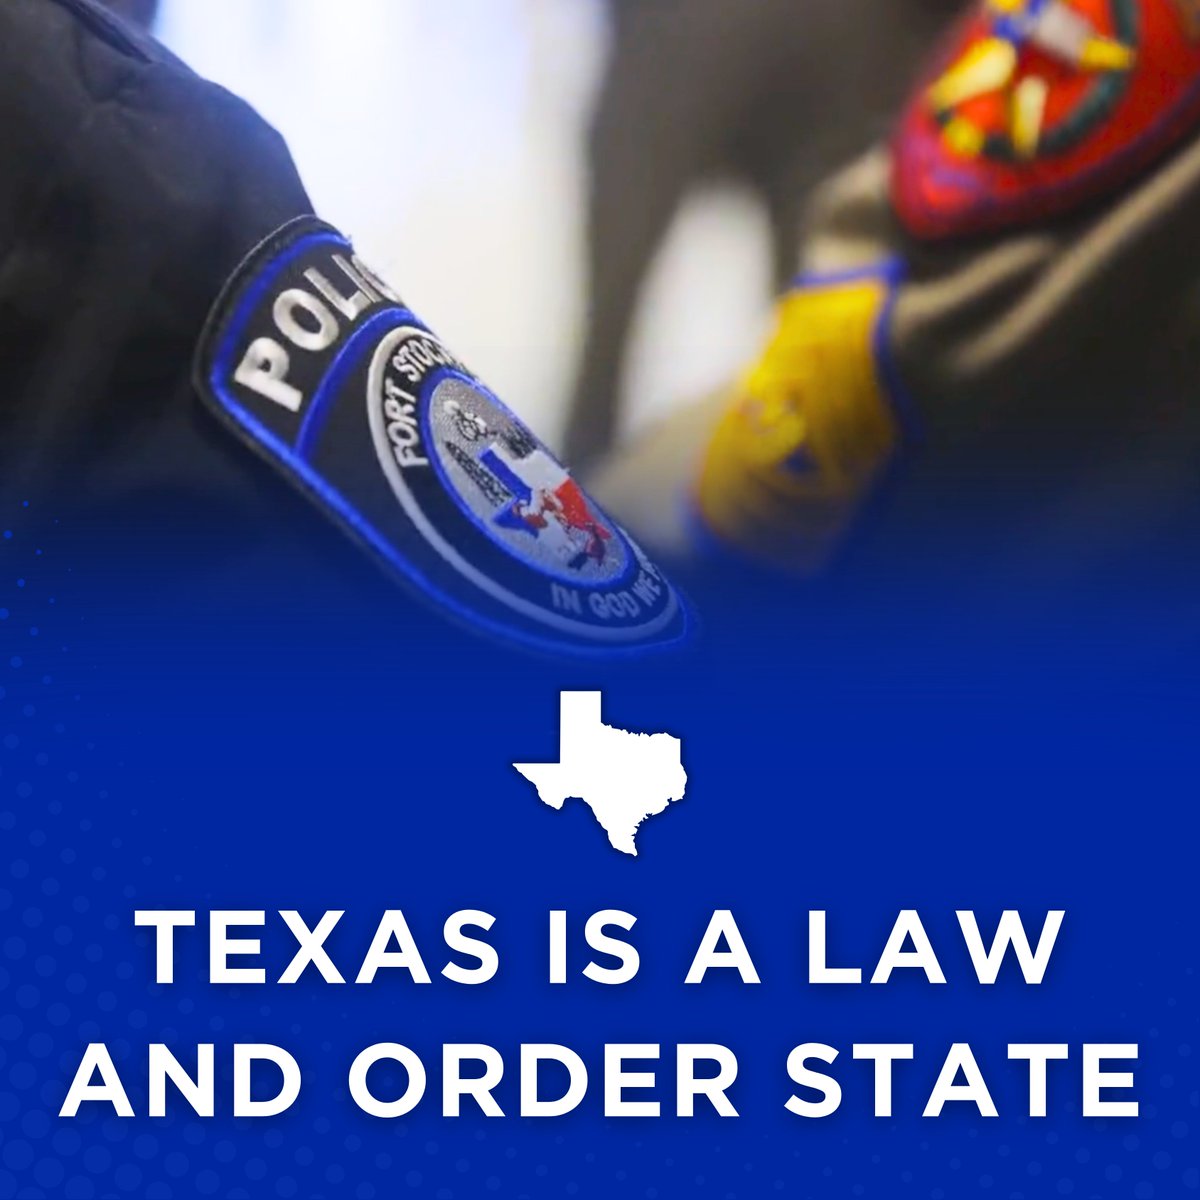 There’s no doubt about it: Texas is, and always will be, a law and order state.

We won’t allow lawlessness to take over our streets.

As long as I am Governor, Texas will always back the blue.

#NationalPoliceWeek